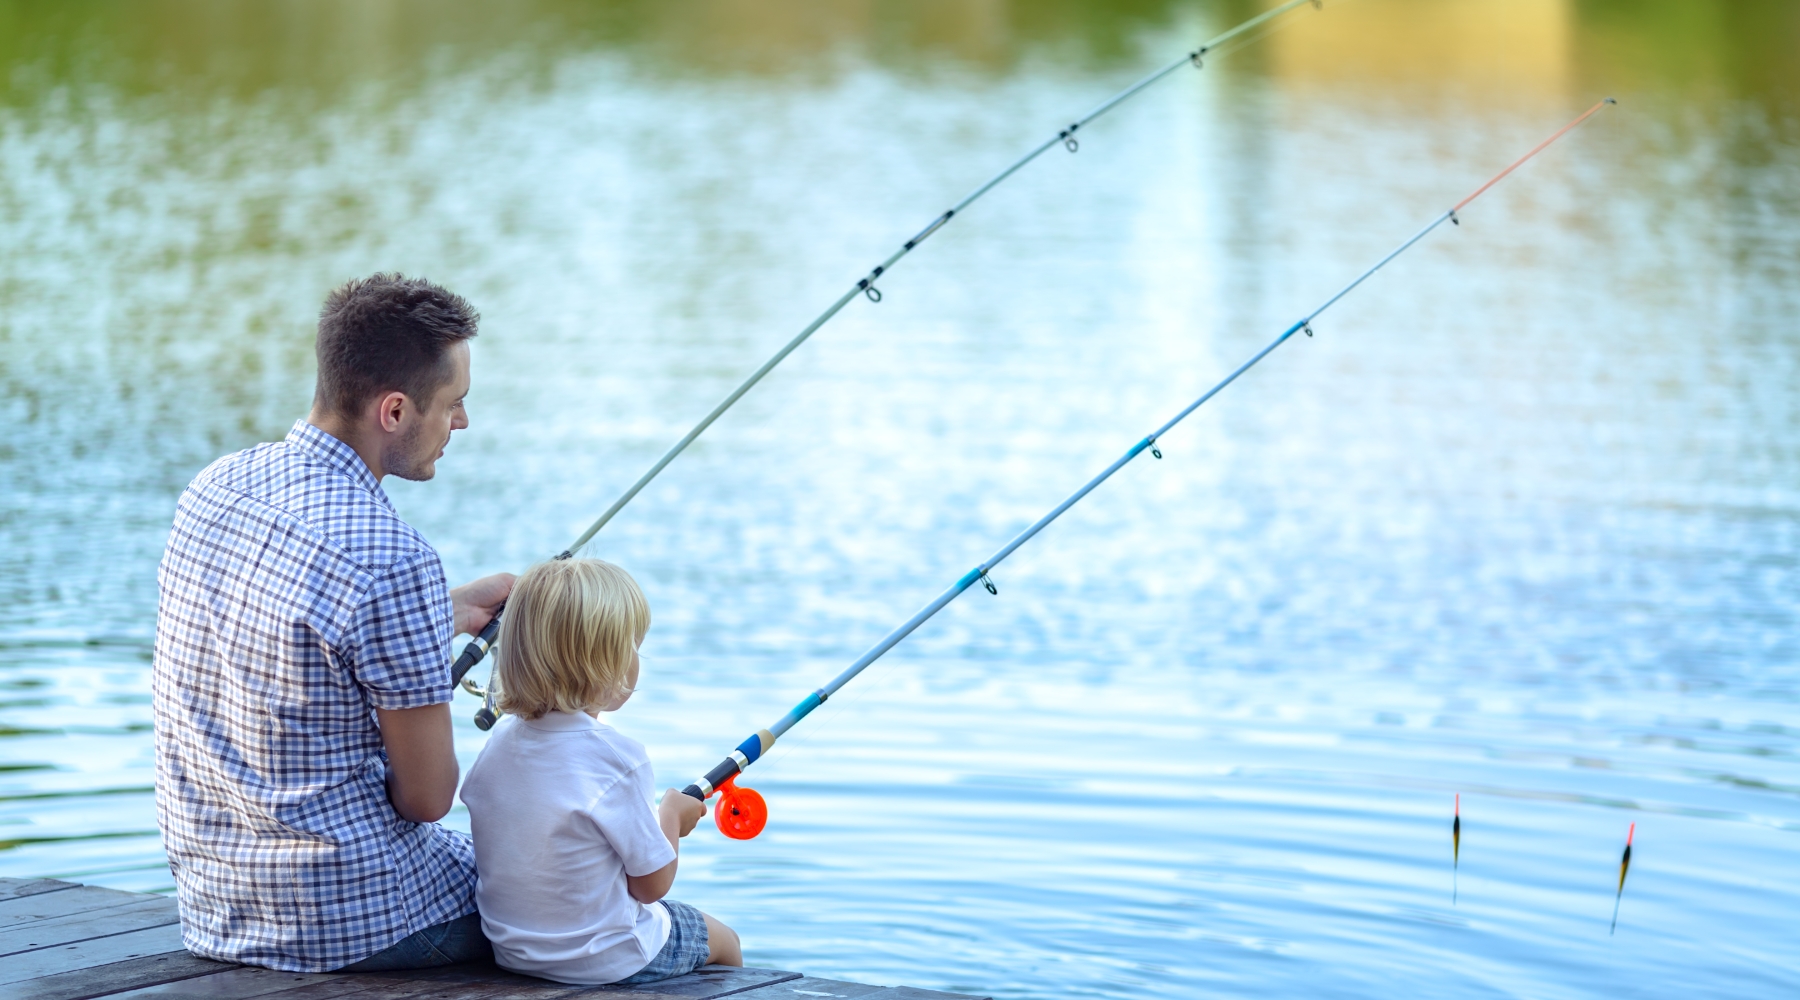 Man fishing with son off a dock